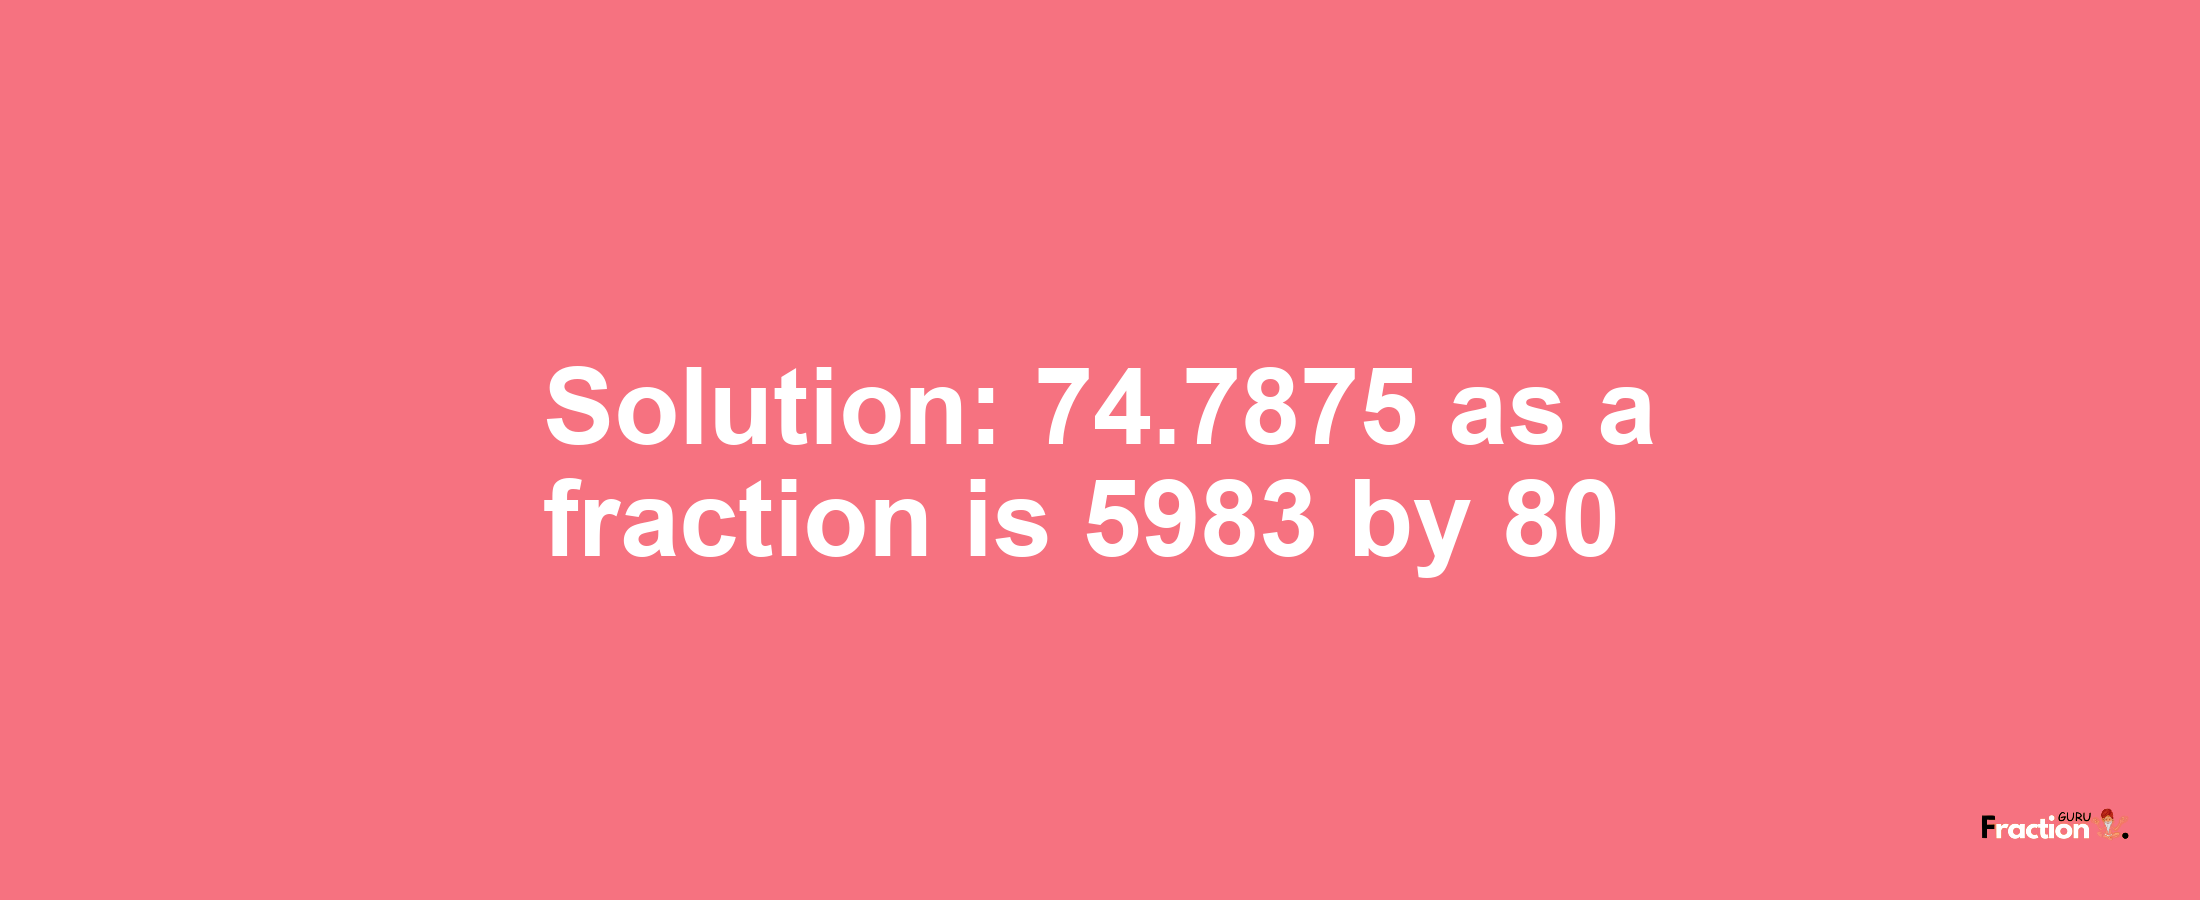 Solution:74.7875 as a fraction is 5983/80